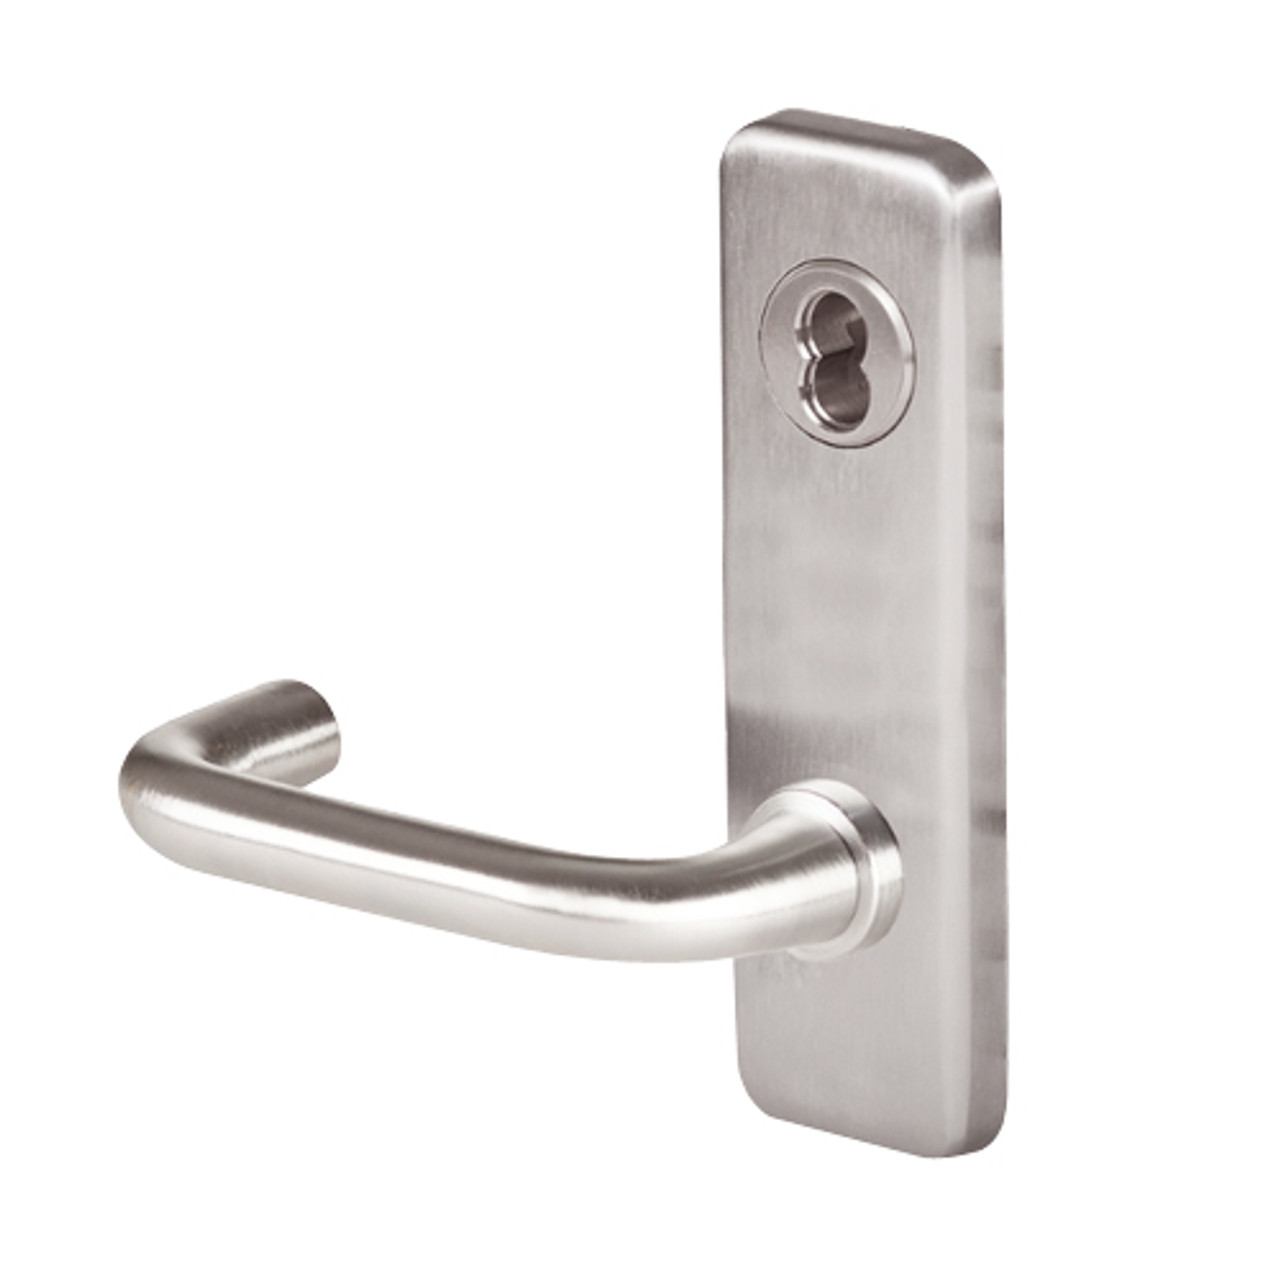 45H0LT3J629 Best 40H Series Privacy Heavy Duty Mortise Lever Lock with Solid Tube Return Style in Bright Stainless Steel